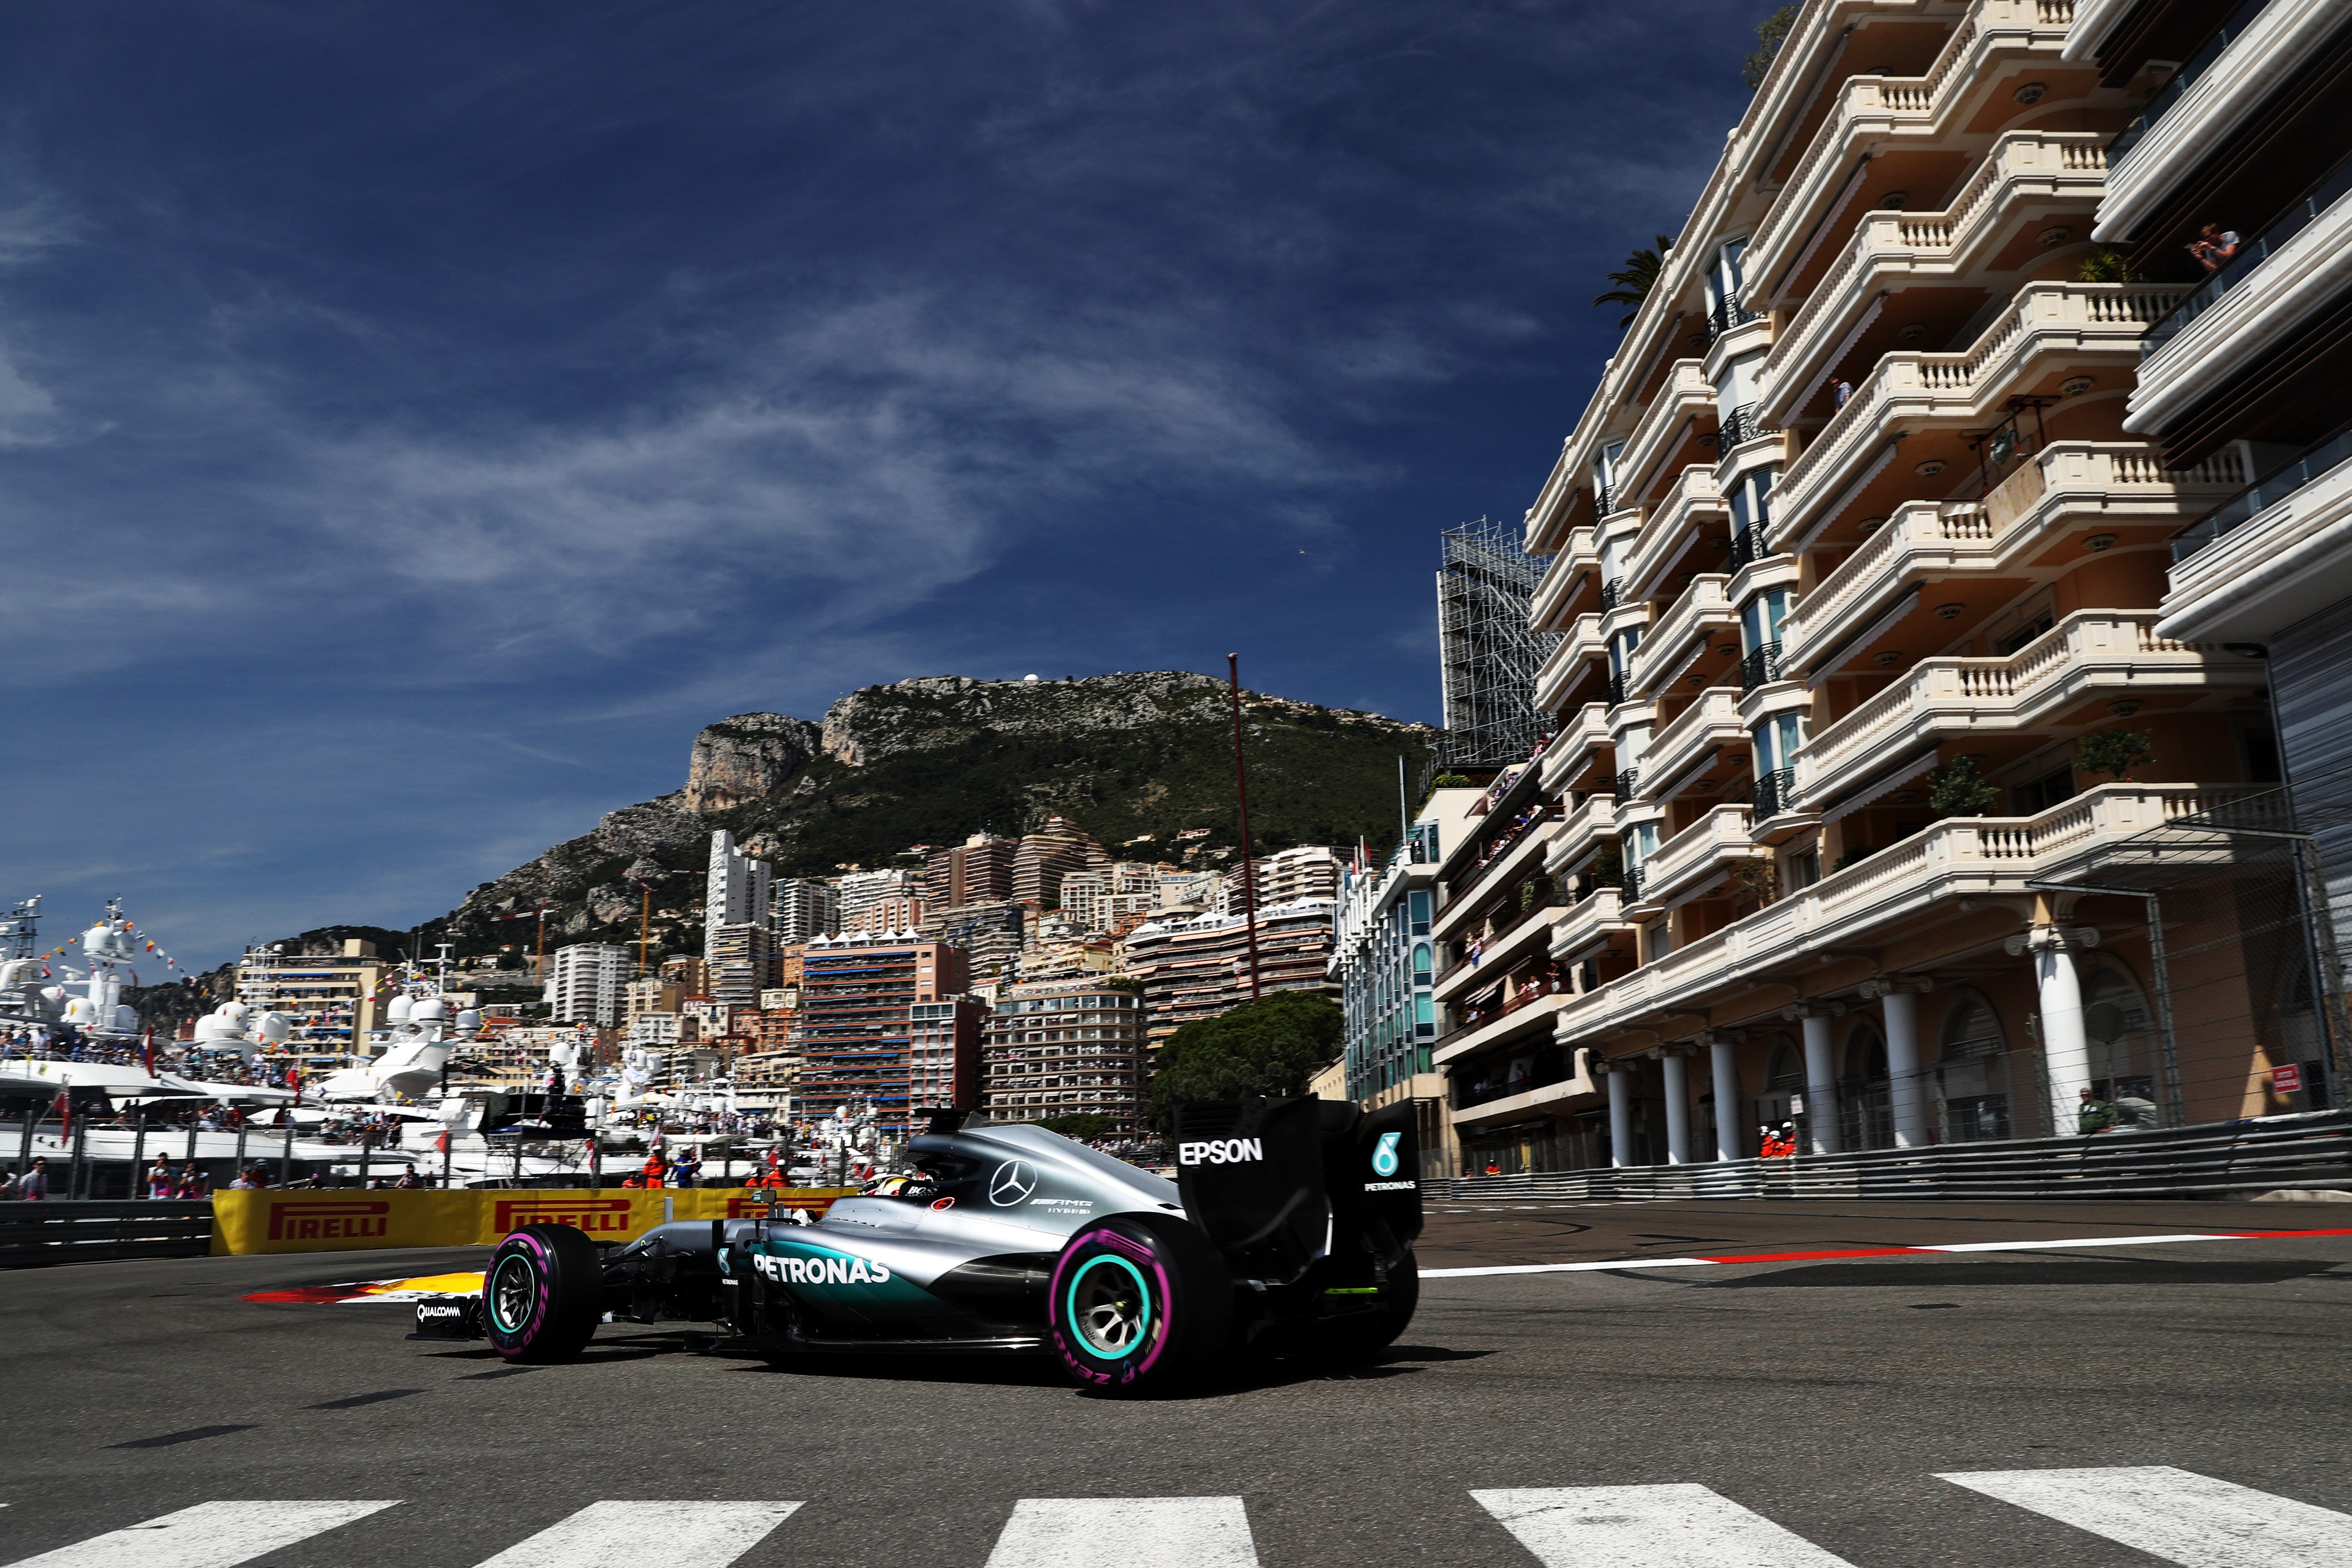 MONTE-CARLO, MONACO - MAY 28: Lewis Hamilton of Great Britain driving the (44) Mercedes AMG Petronas F1 Team Mercedes F1 WO7 Mercedes PU106C Hybrid turbo on track during final practice ahead of the Monaco Formula One Grand Prix at Circuit de Monaco on May 28, 2016 in Monte-Carlo, Monaco. (Photo by Mark Thompson/Getty Images)